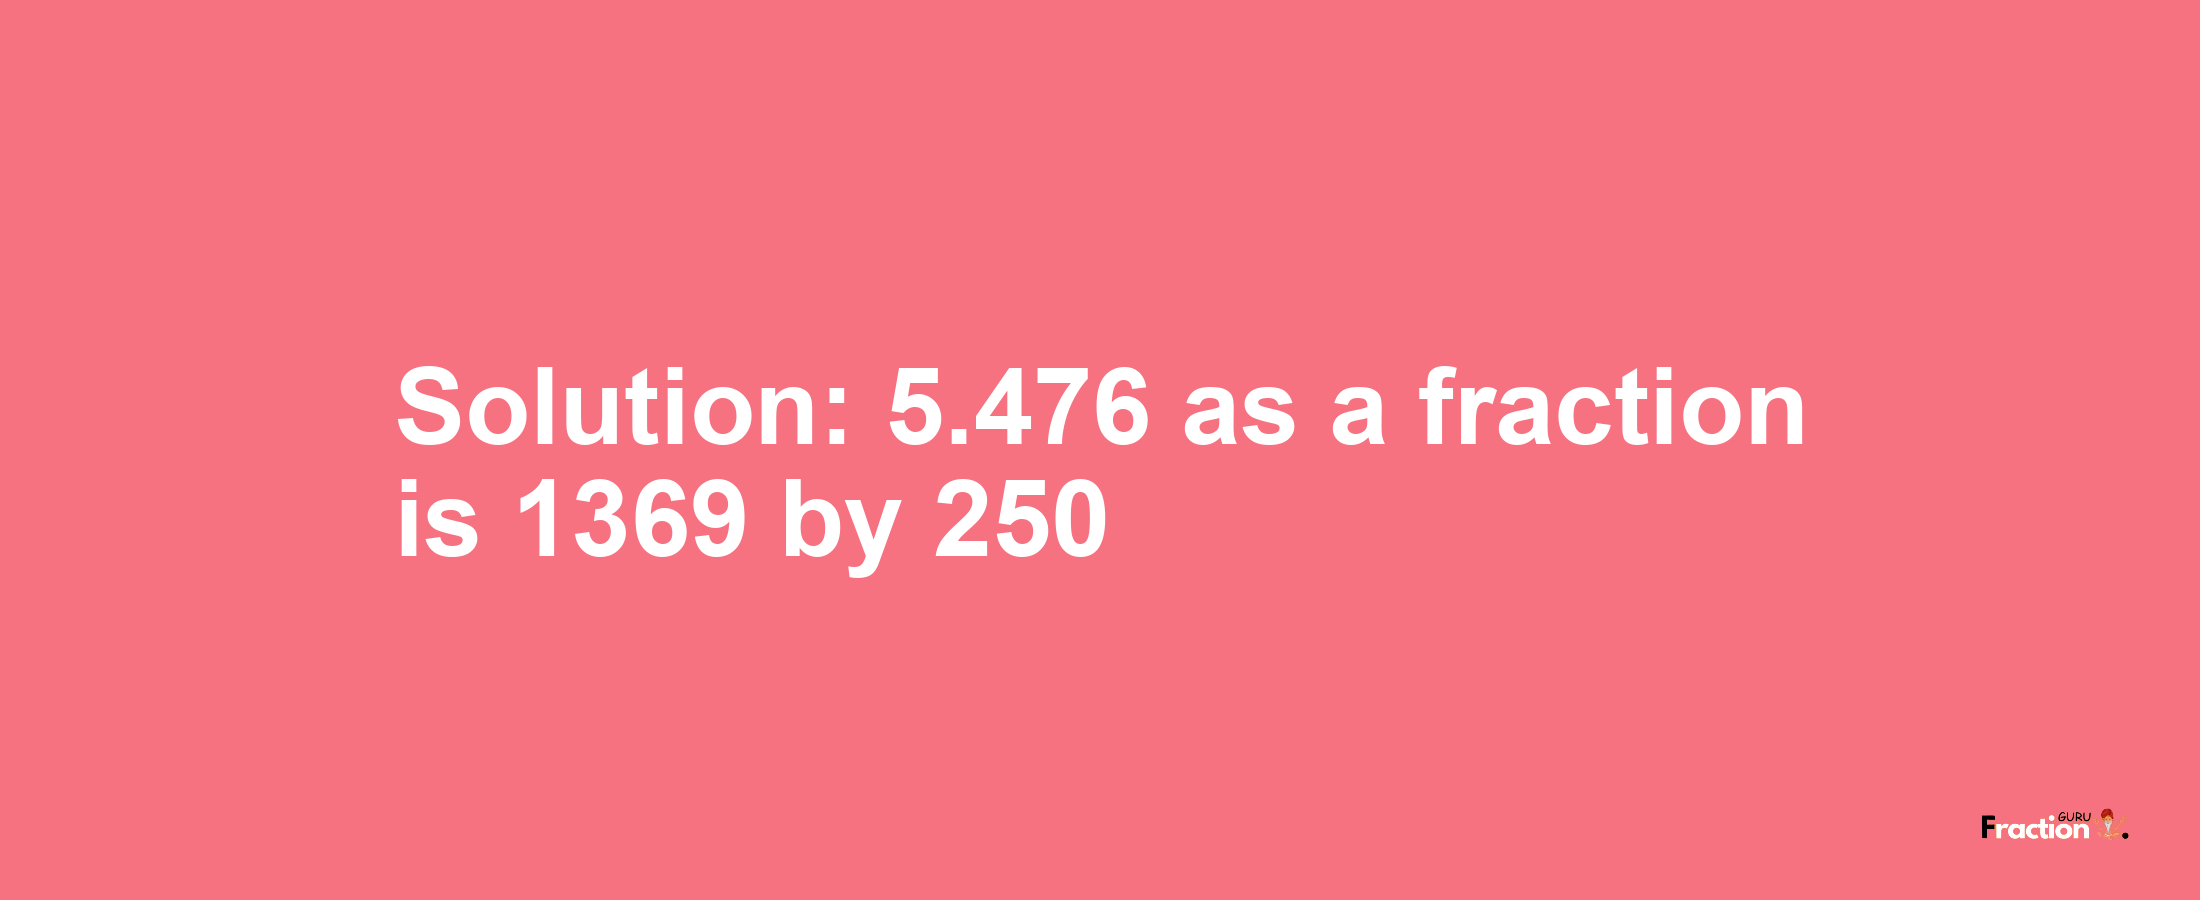 Solution:5.476 as a fraction is 1369/250